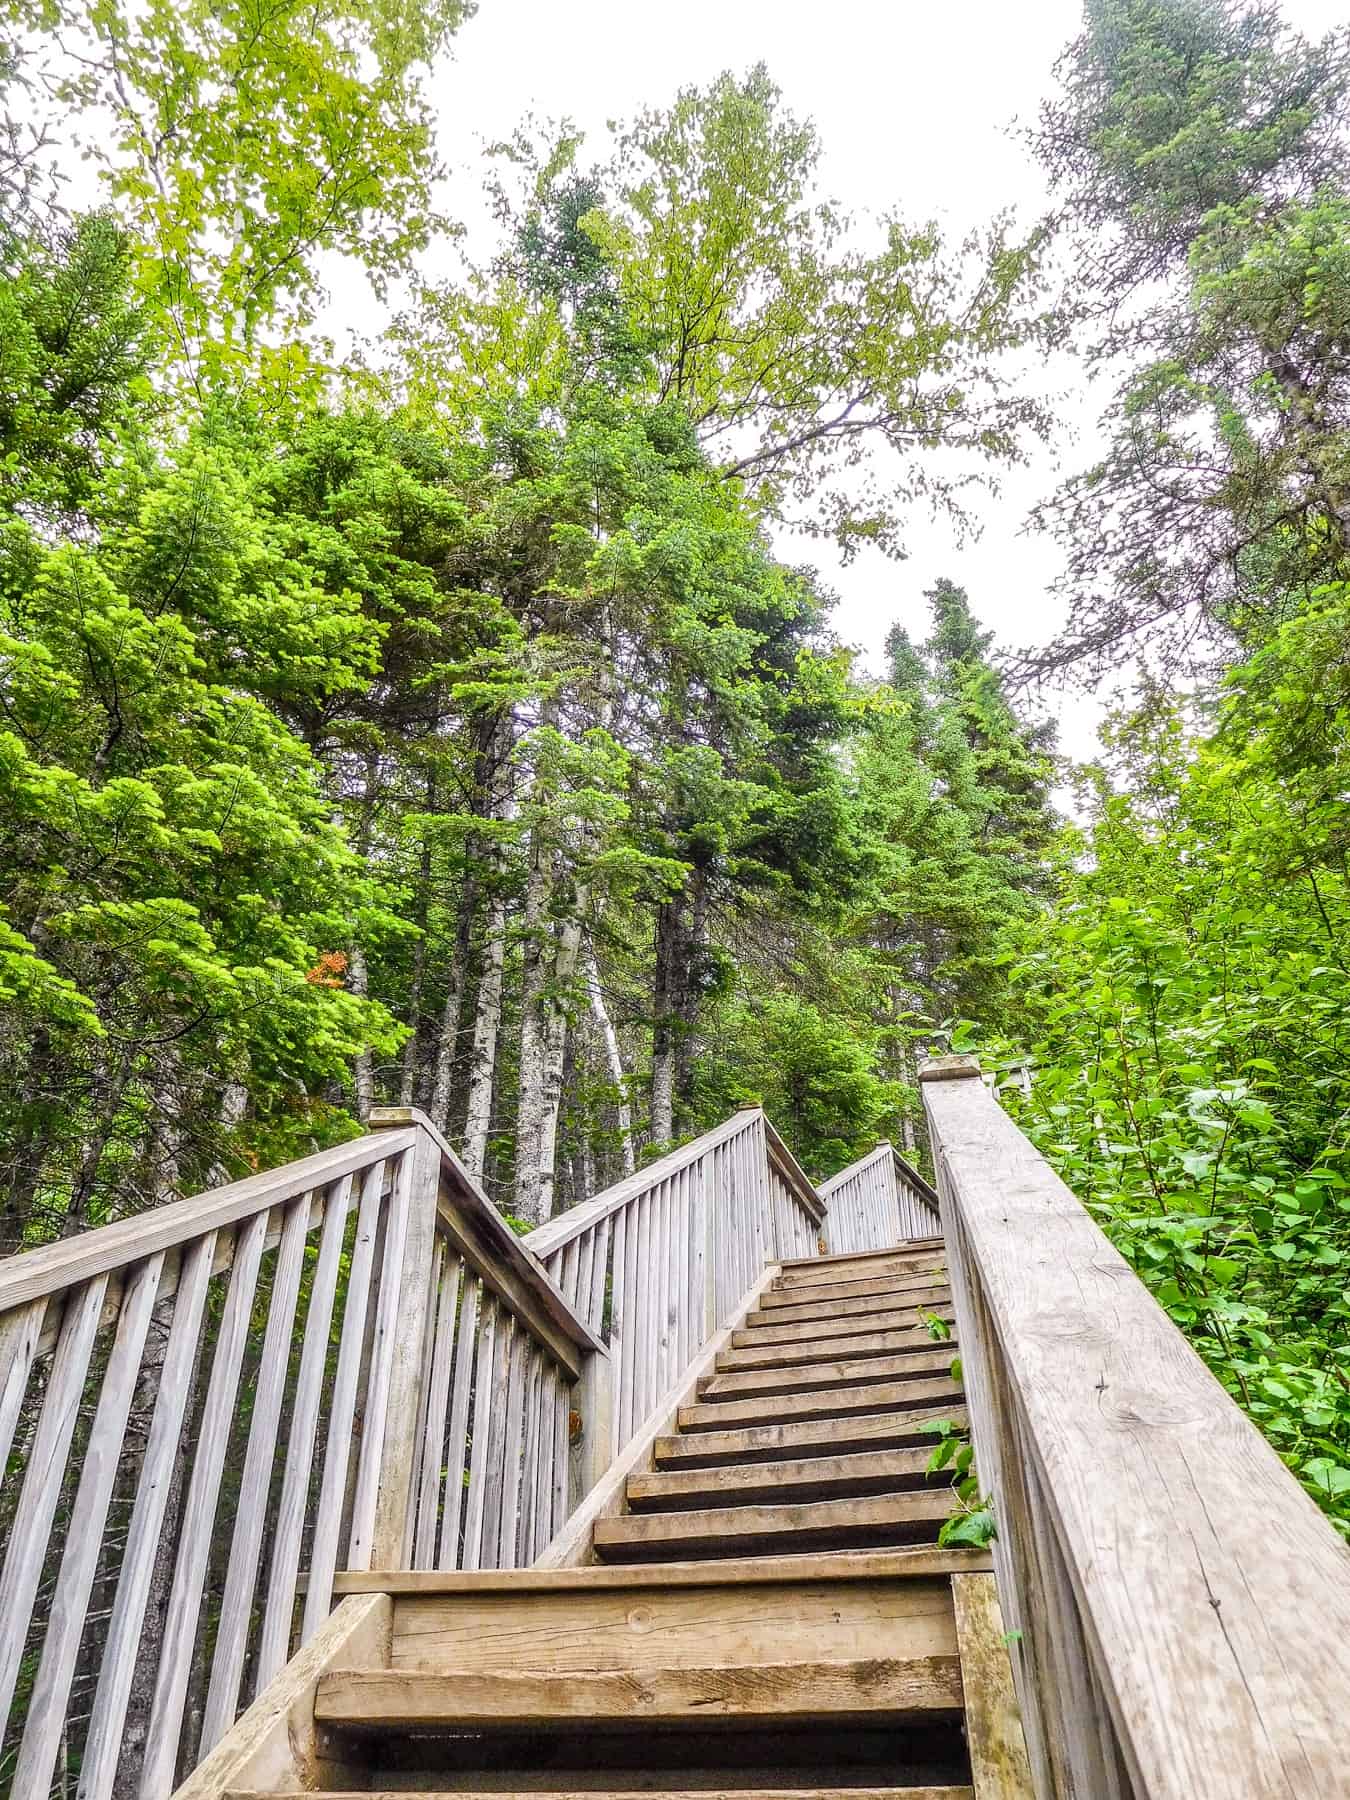 The hike to the Devils Kettle Waterfall in Judge CR Magney State Park requires many stairs